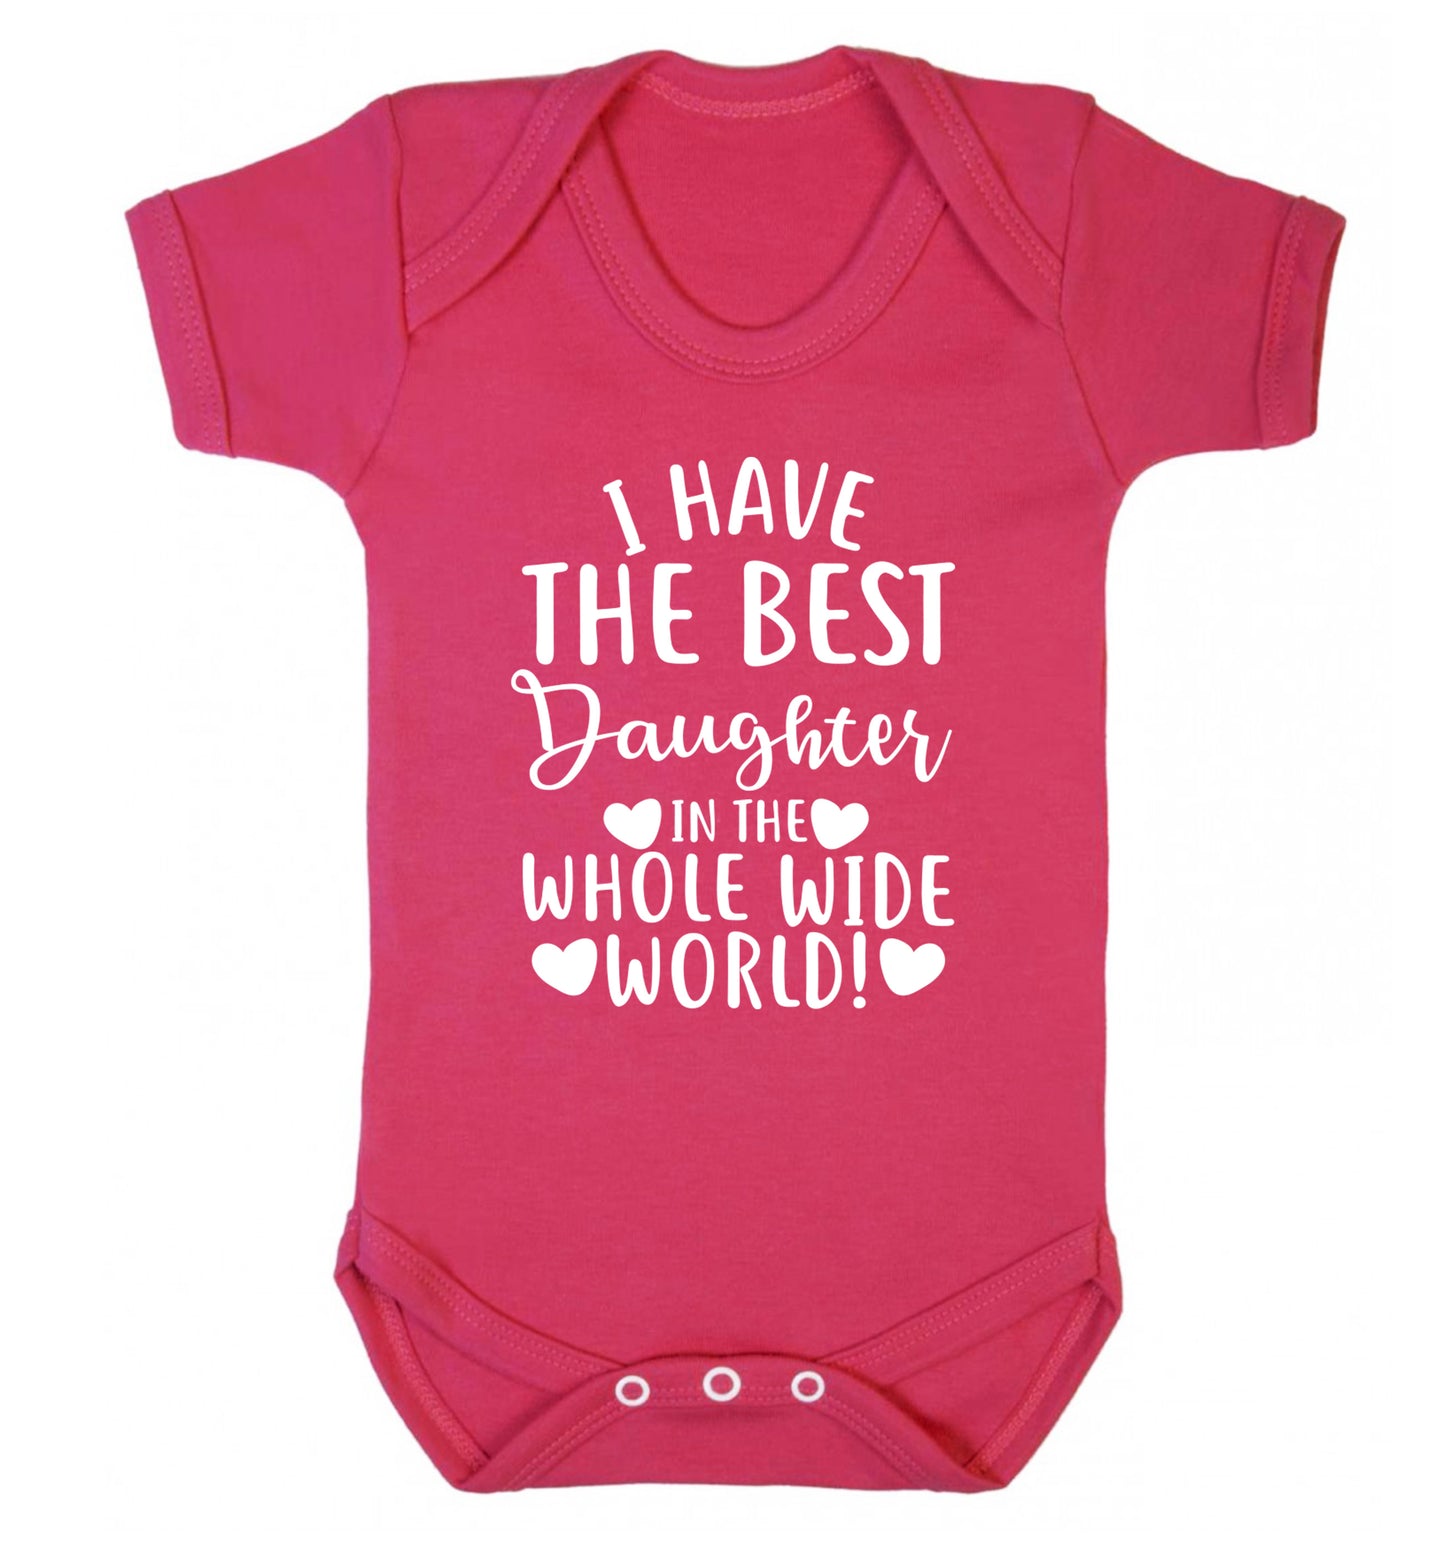 I have the best daughter in the whole wide world! Baby Vest dark pink 18-24 months